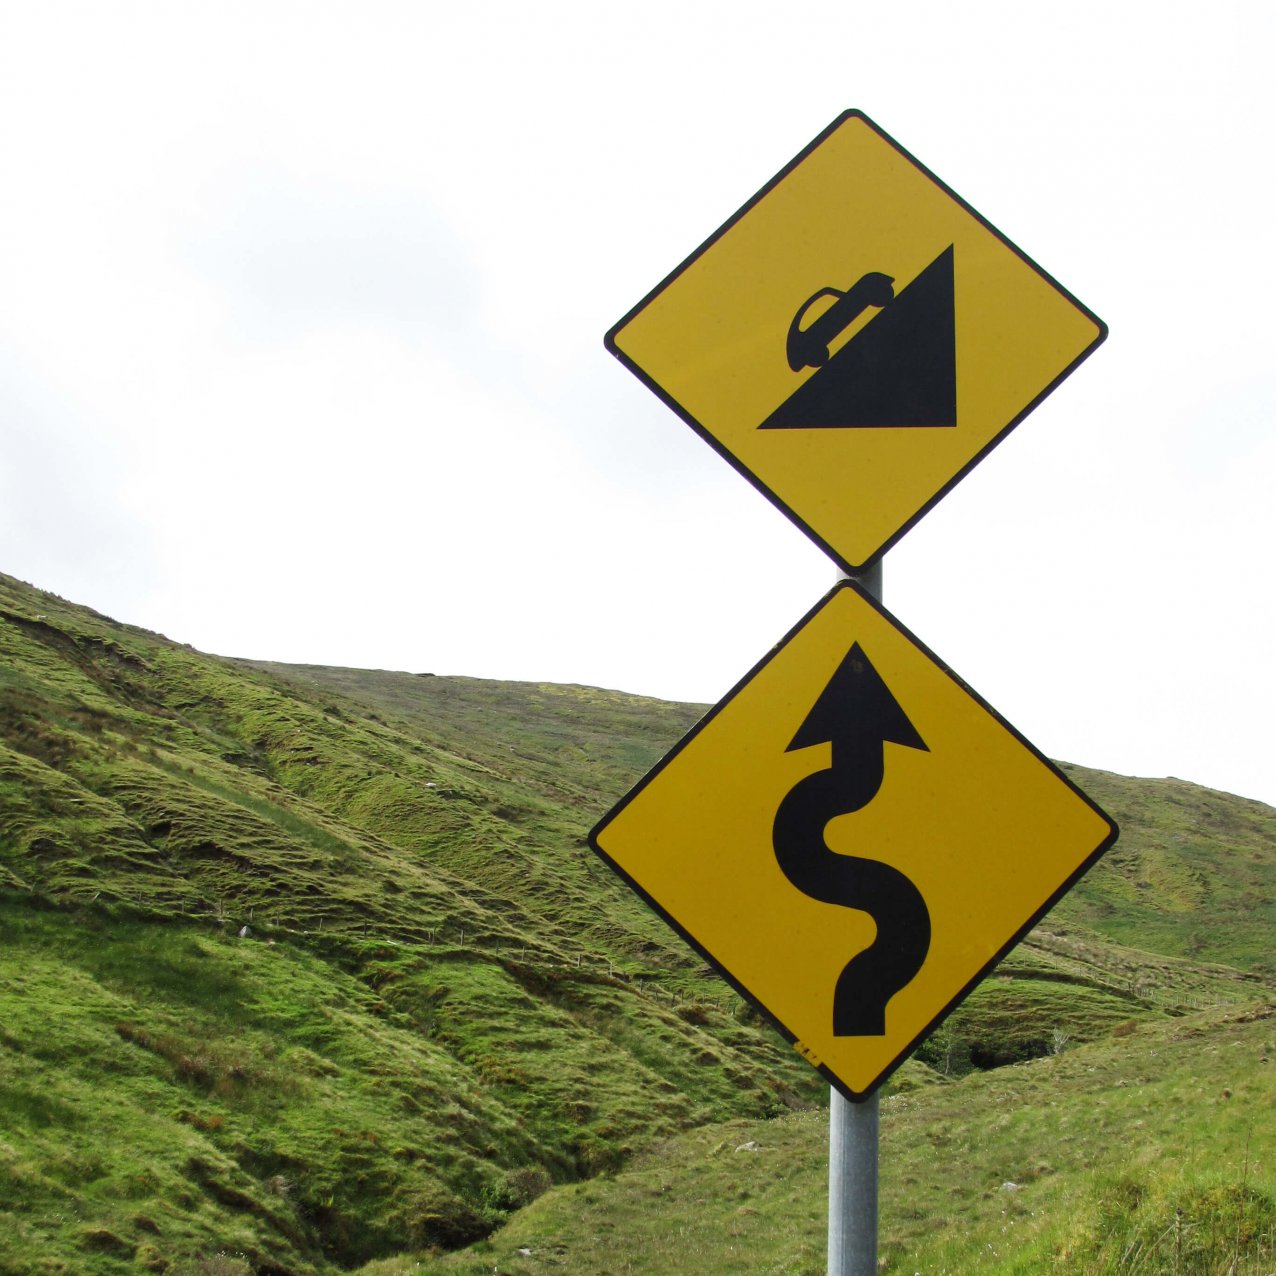 Roadsigns indicating a twisting, uphill climb ahead, with green hills in the background, somewhere in Ireland